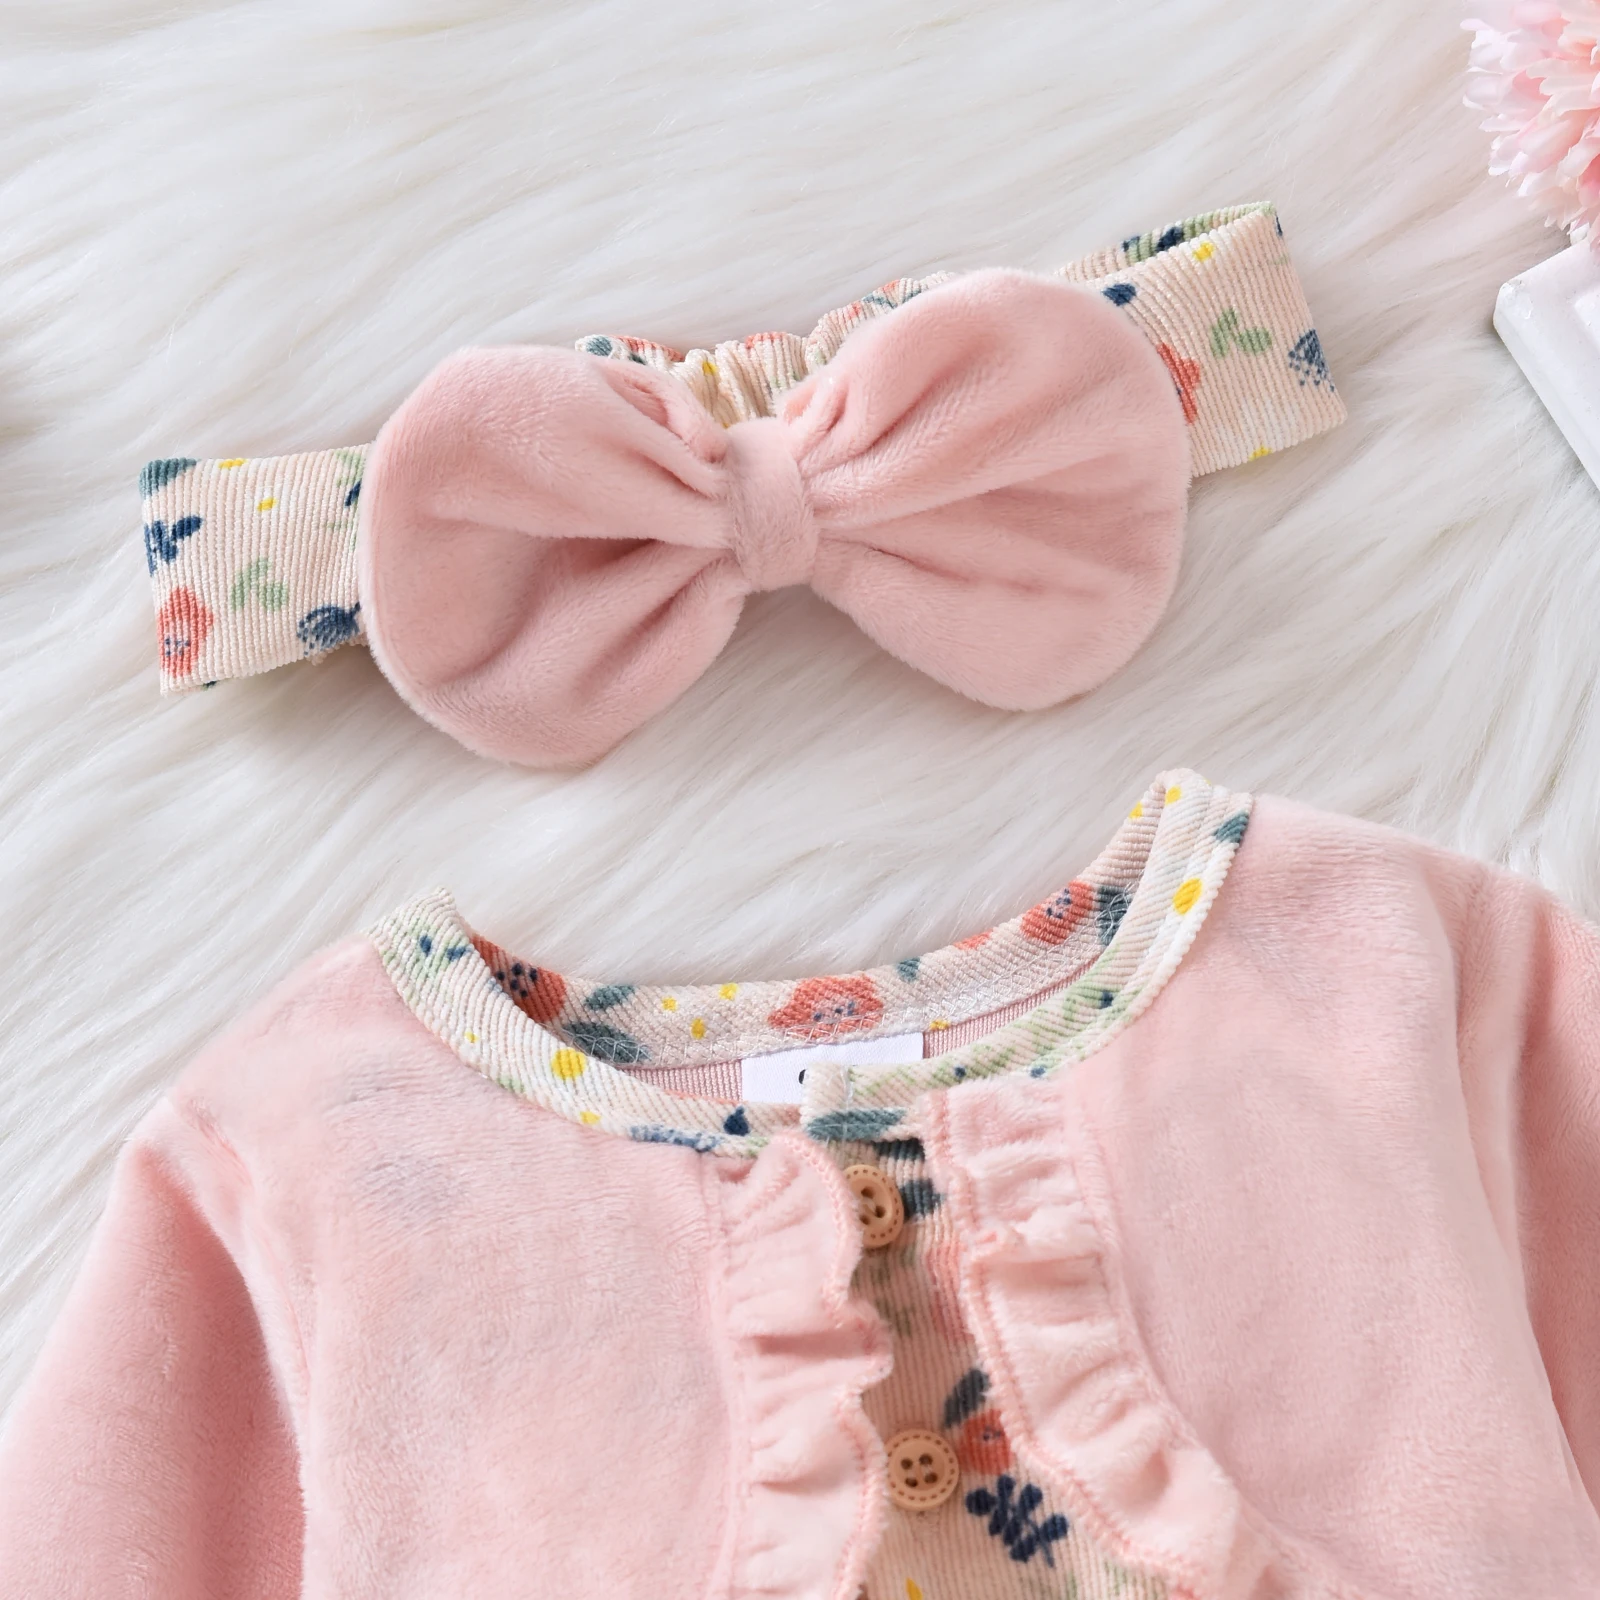 Ma&Baby 0-18M Newborn Infant Baby Girls Rompers Princess Bow Long Sleeve Flower Jumpsuit Playsuit Autumn Spring  Costumes D95 Newborn Sailor Romper Girls Boy Costume Anchor